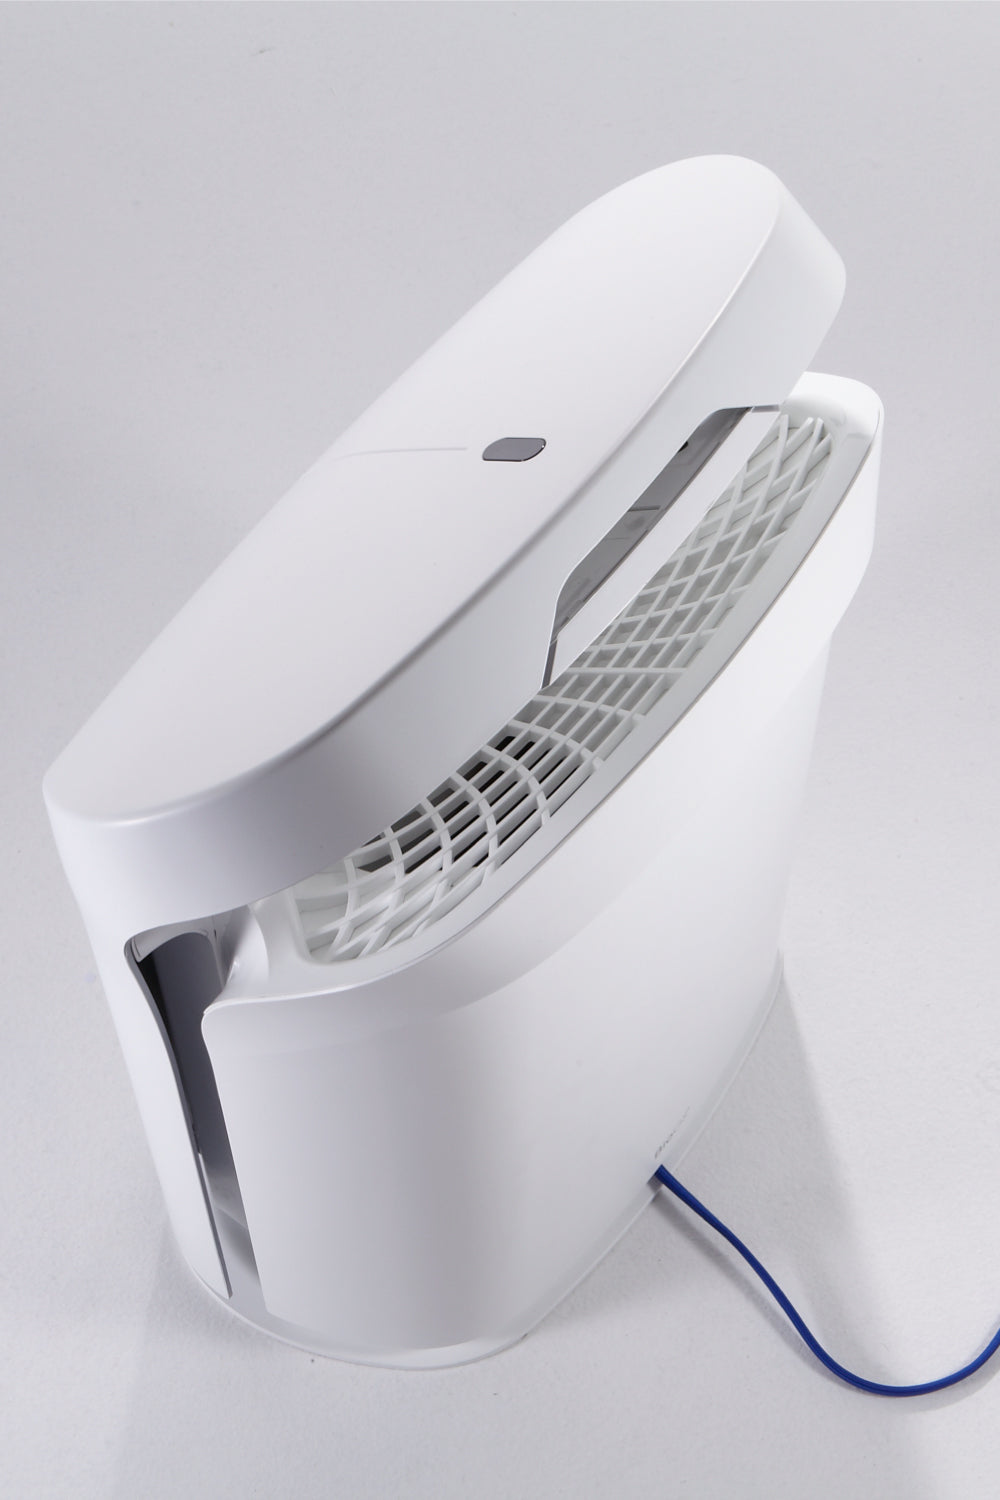 Top view of the BioGS 2.0 air purifier